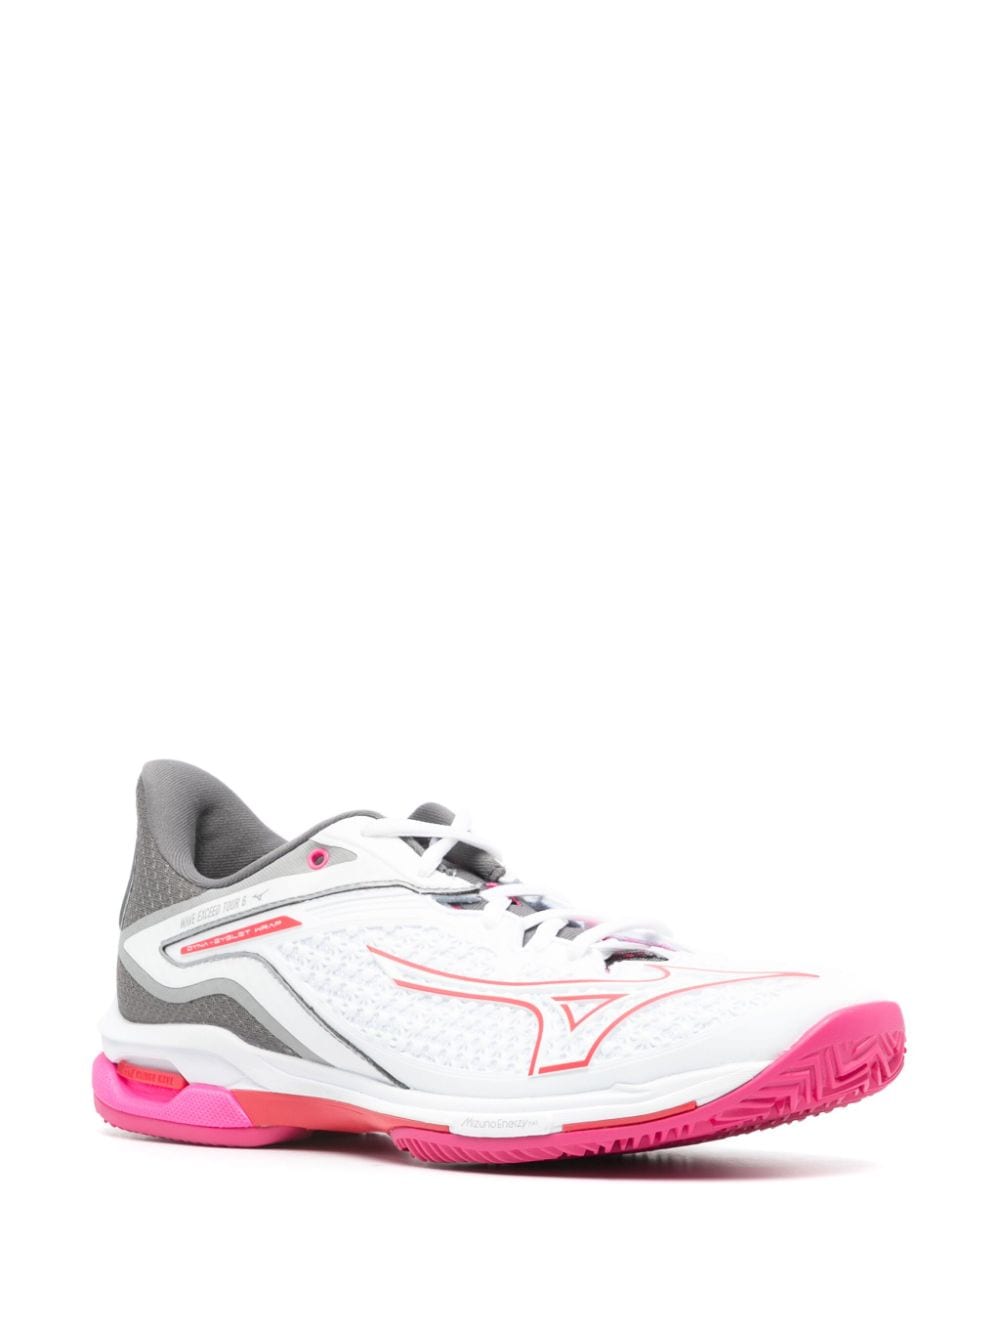 Image 2 of Mizuno Wave Exceed Tour 6 CC sneakers